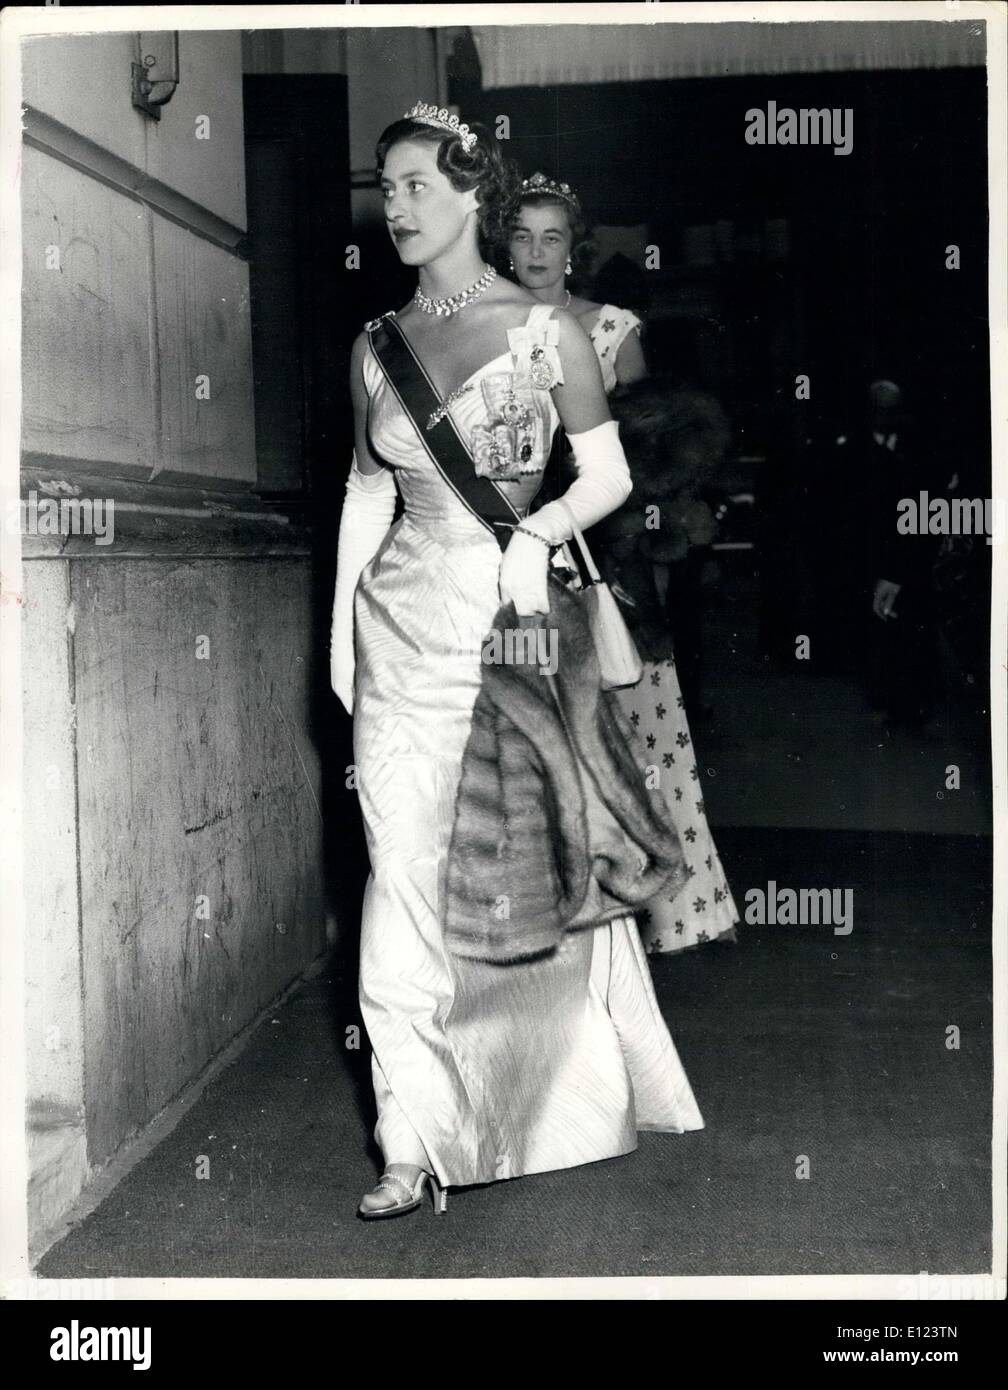 Jul. 01, 1984 - Princess Margaret at Covent Garden Photo Shows: Princess Margaret arriving at Covent Garden Opera House last night, for the Gala Performance held in honor of King Gustav and Queen Louise of Sweden. Stock Photo